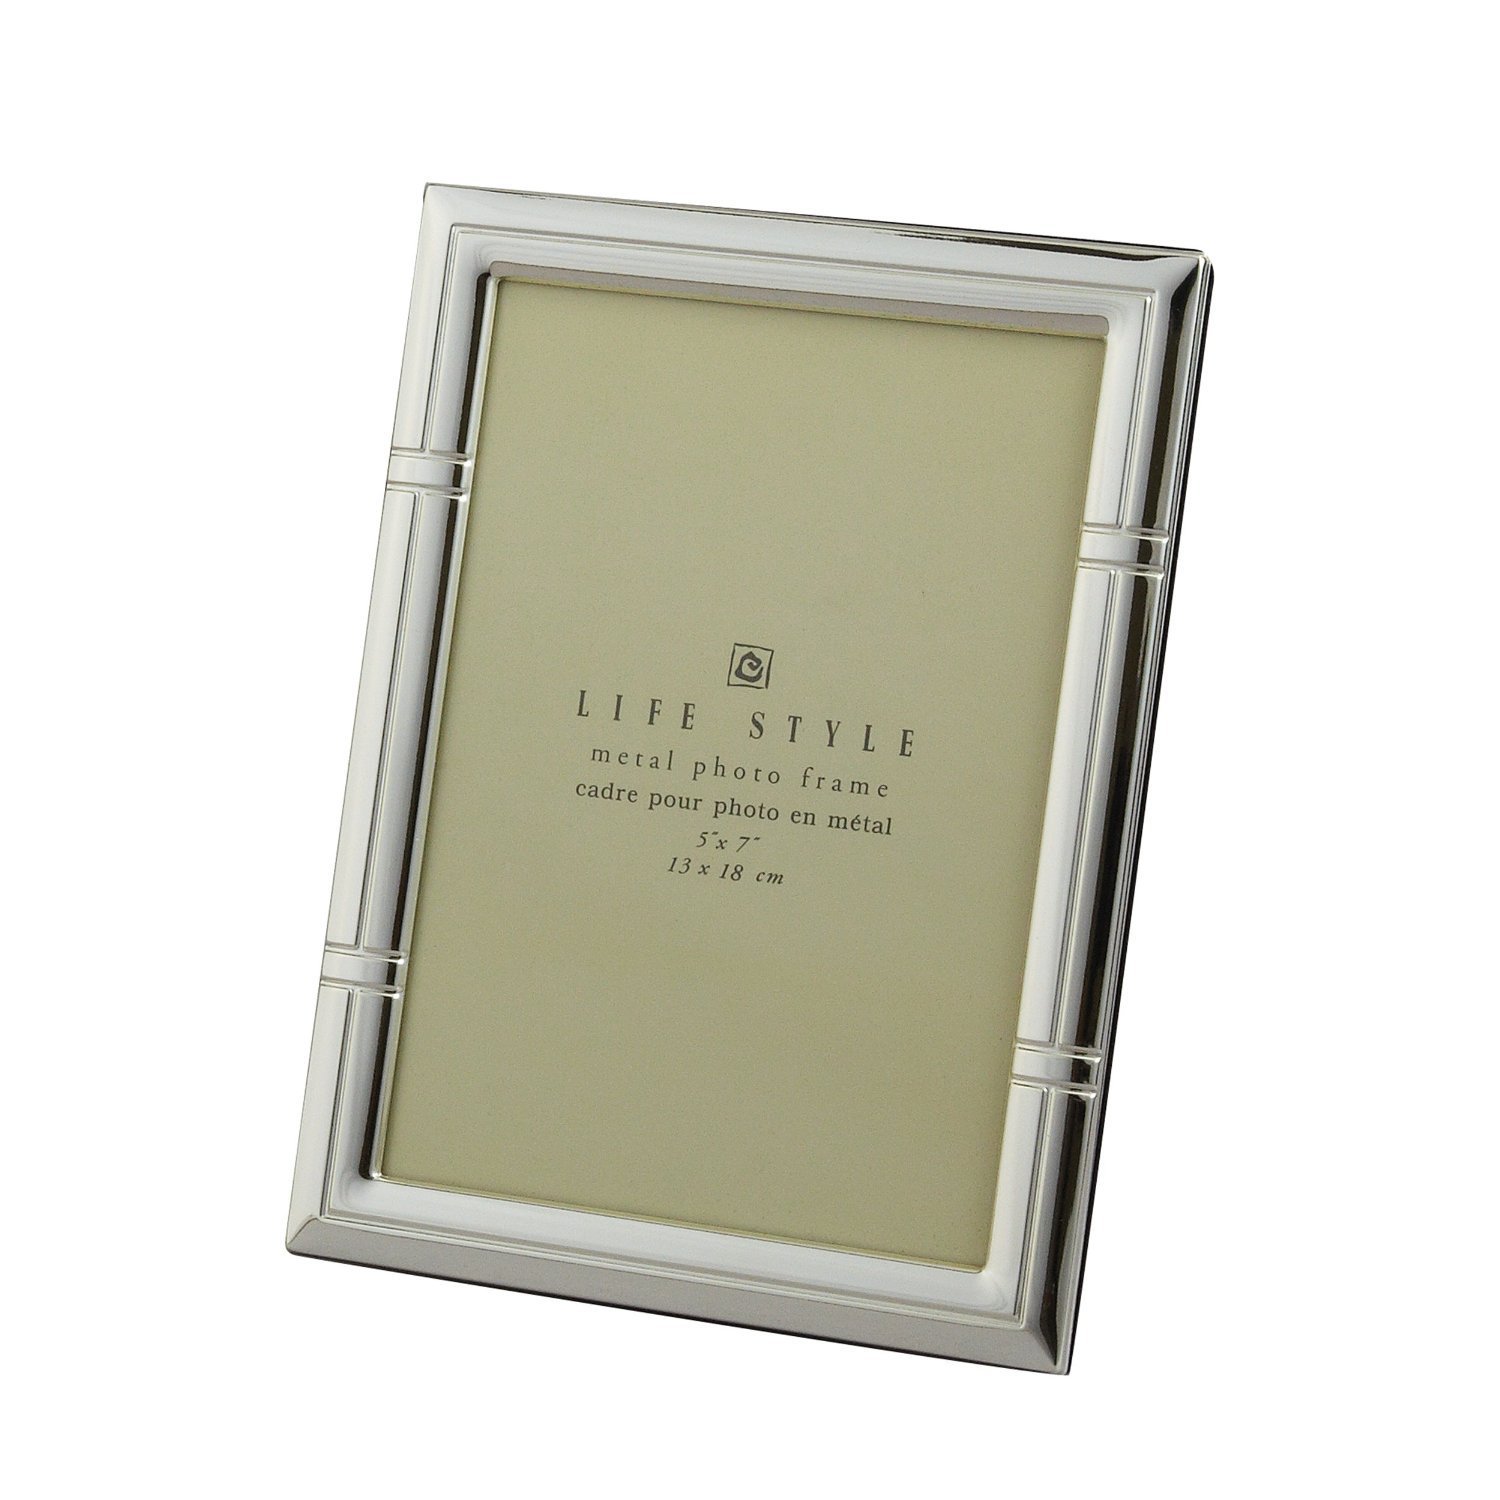 FLAT SILVER PHOTO PICTURE FRAME GUNMATEL BRUSHED STYLE VARIOUS SIZE 